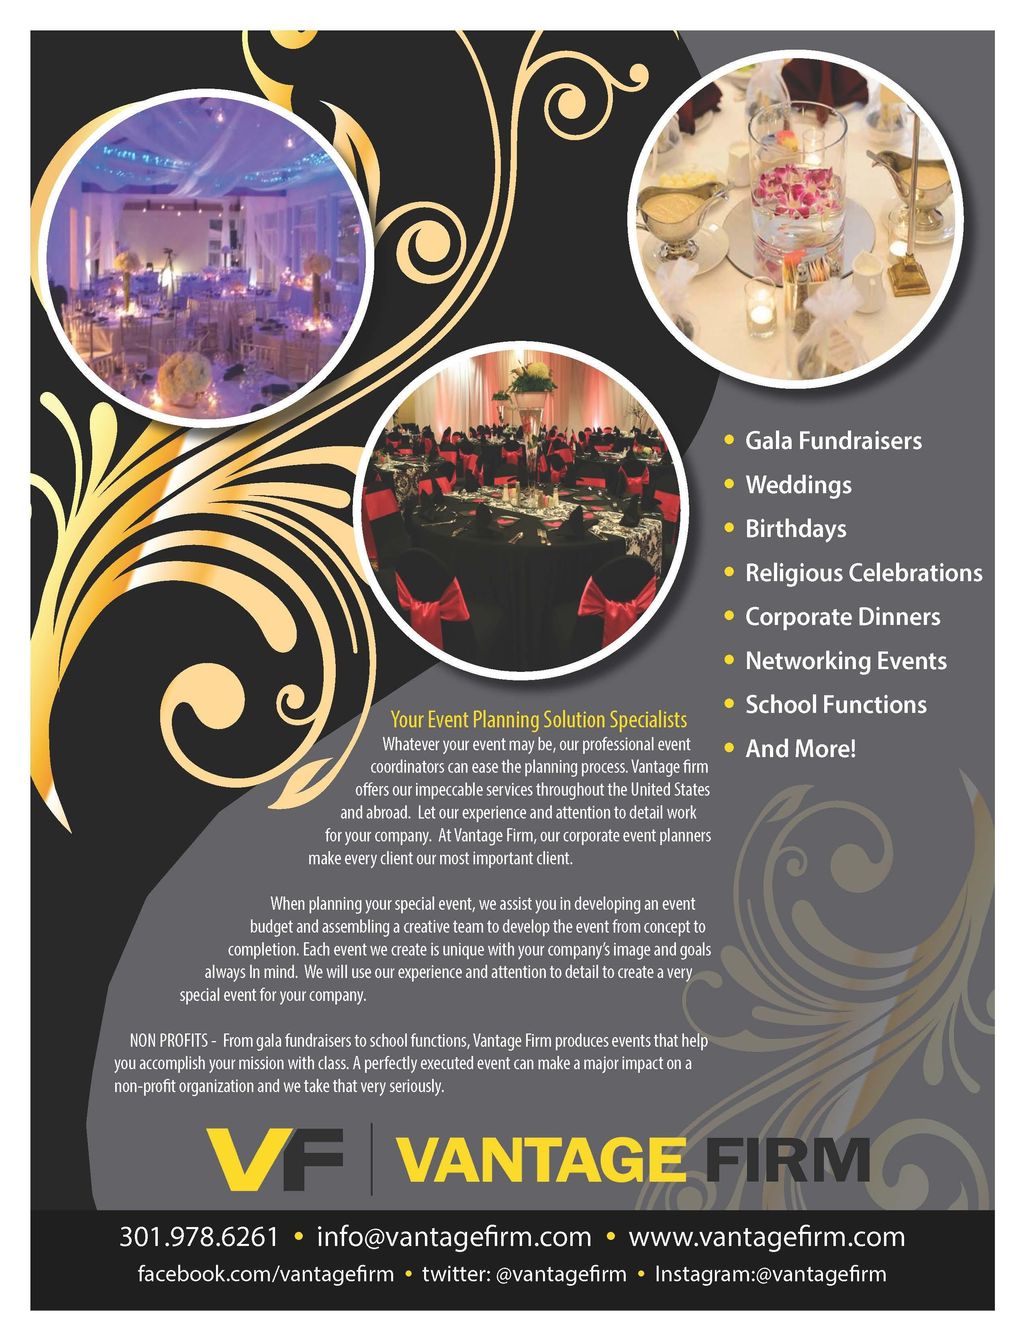 Vantage Firm Planning and Designs